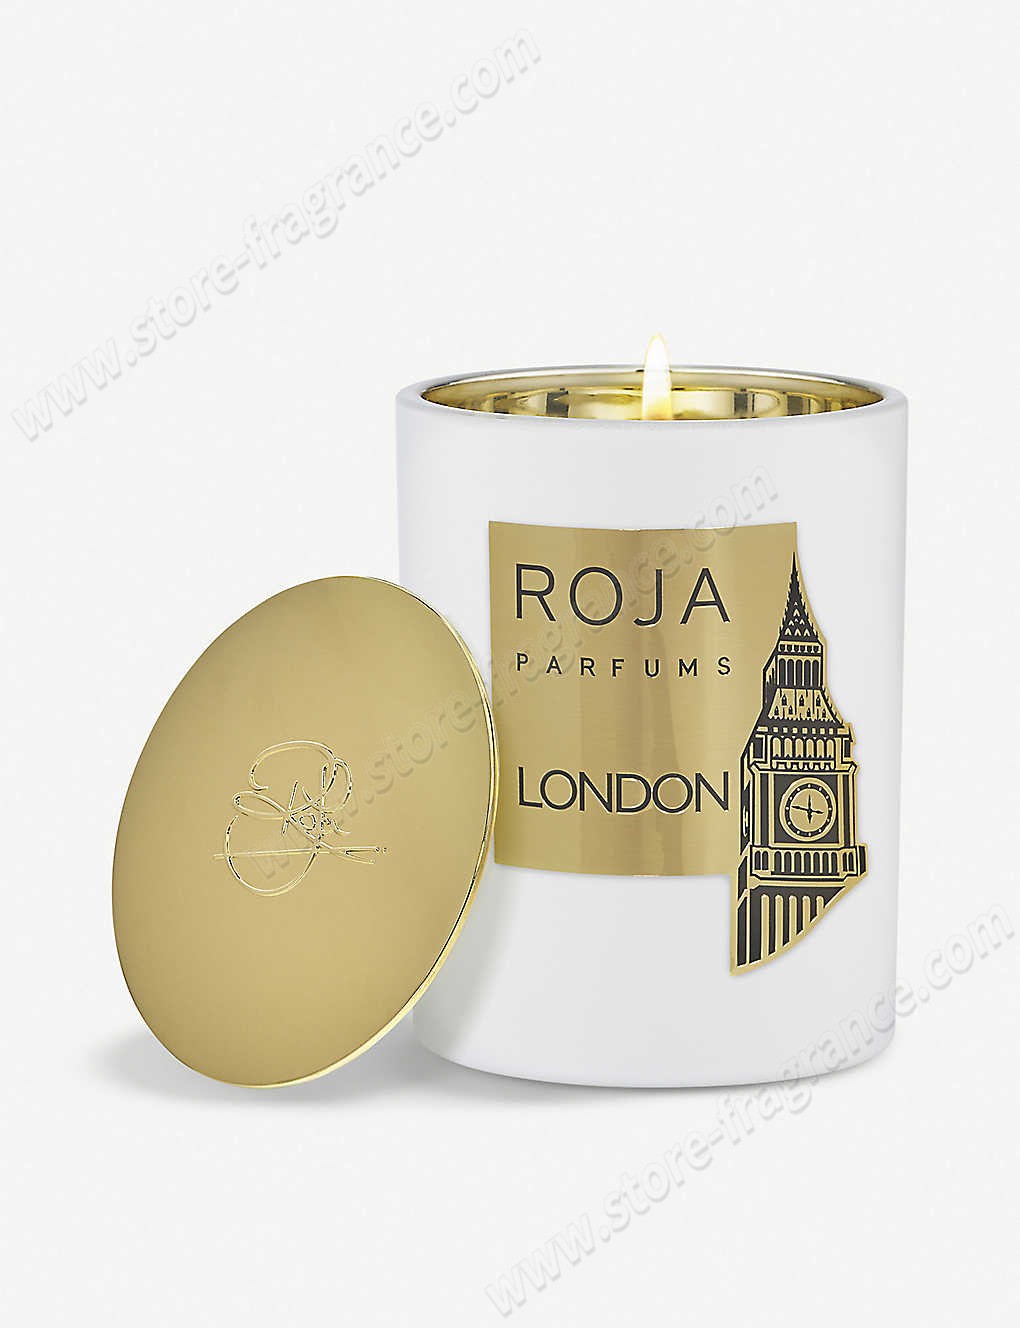 ROJA PARFUMS/London scented candle 300g ✿ Discount Store - ROJA PARFUMS/London scented candle 300g ✿ Discount Store